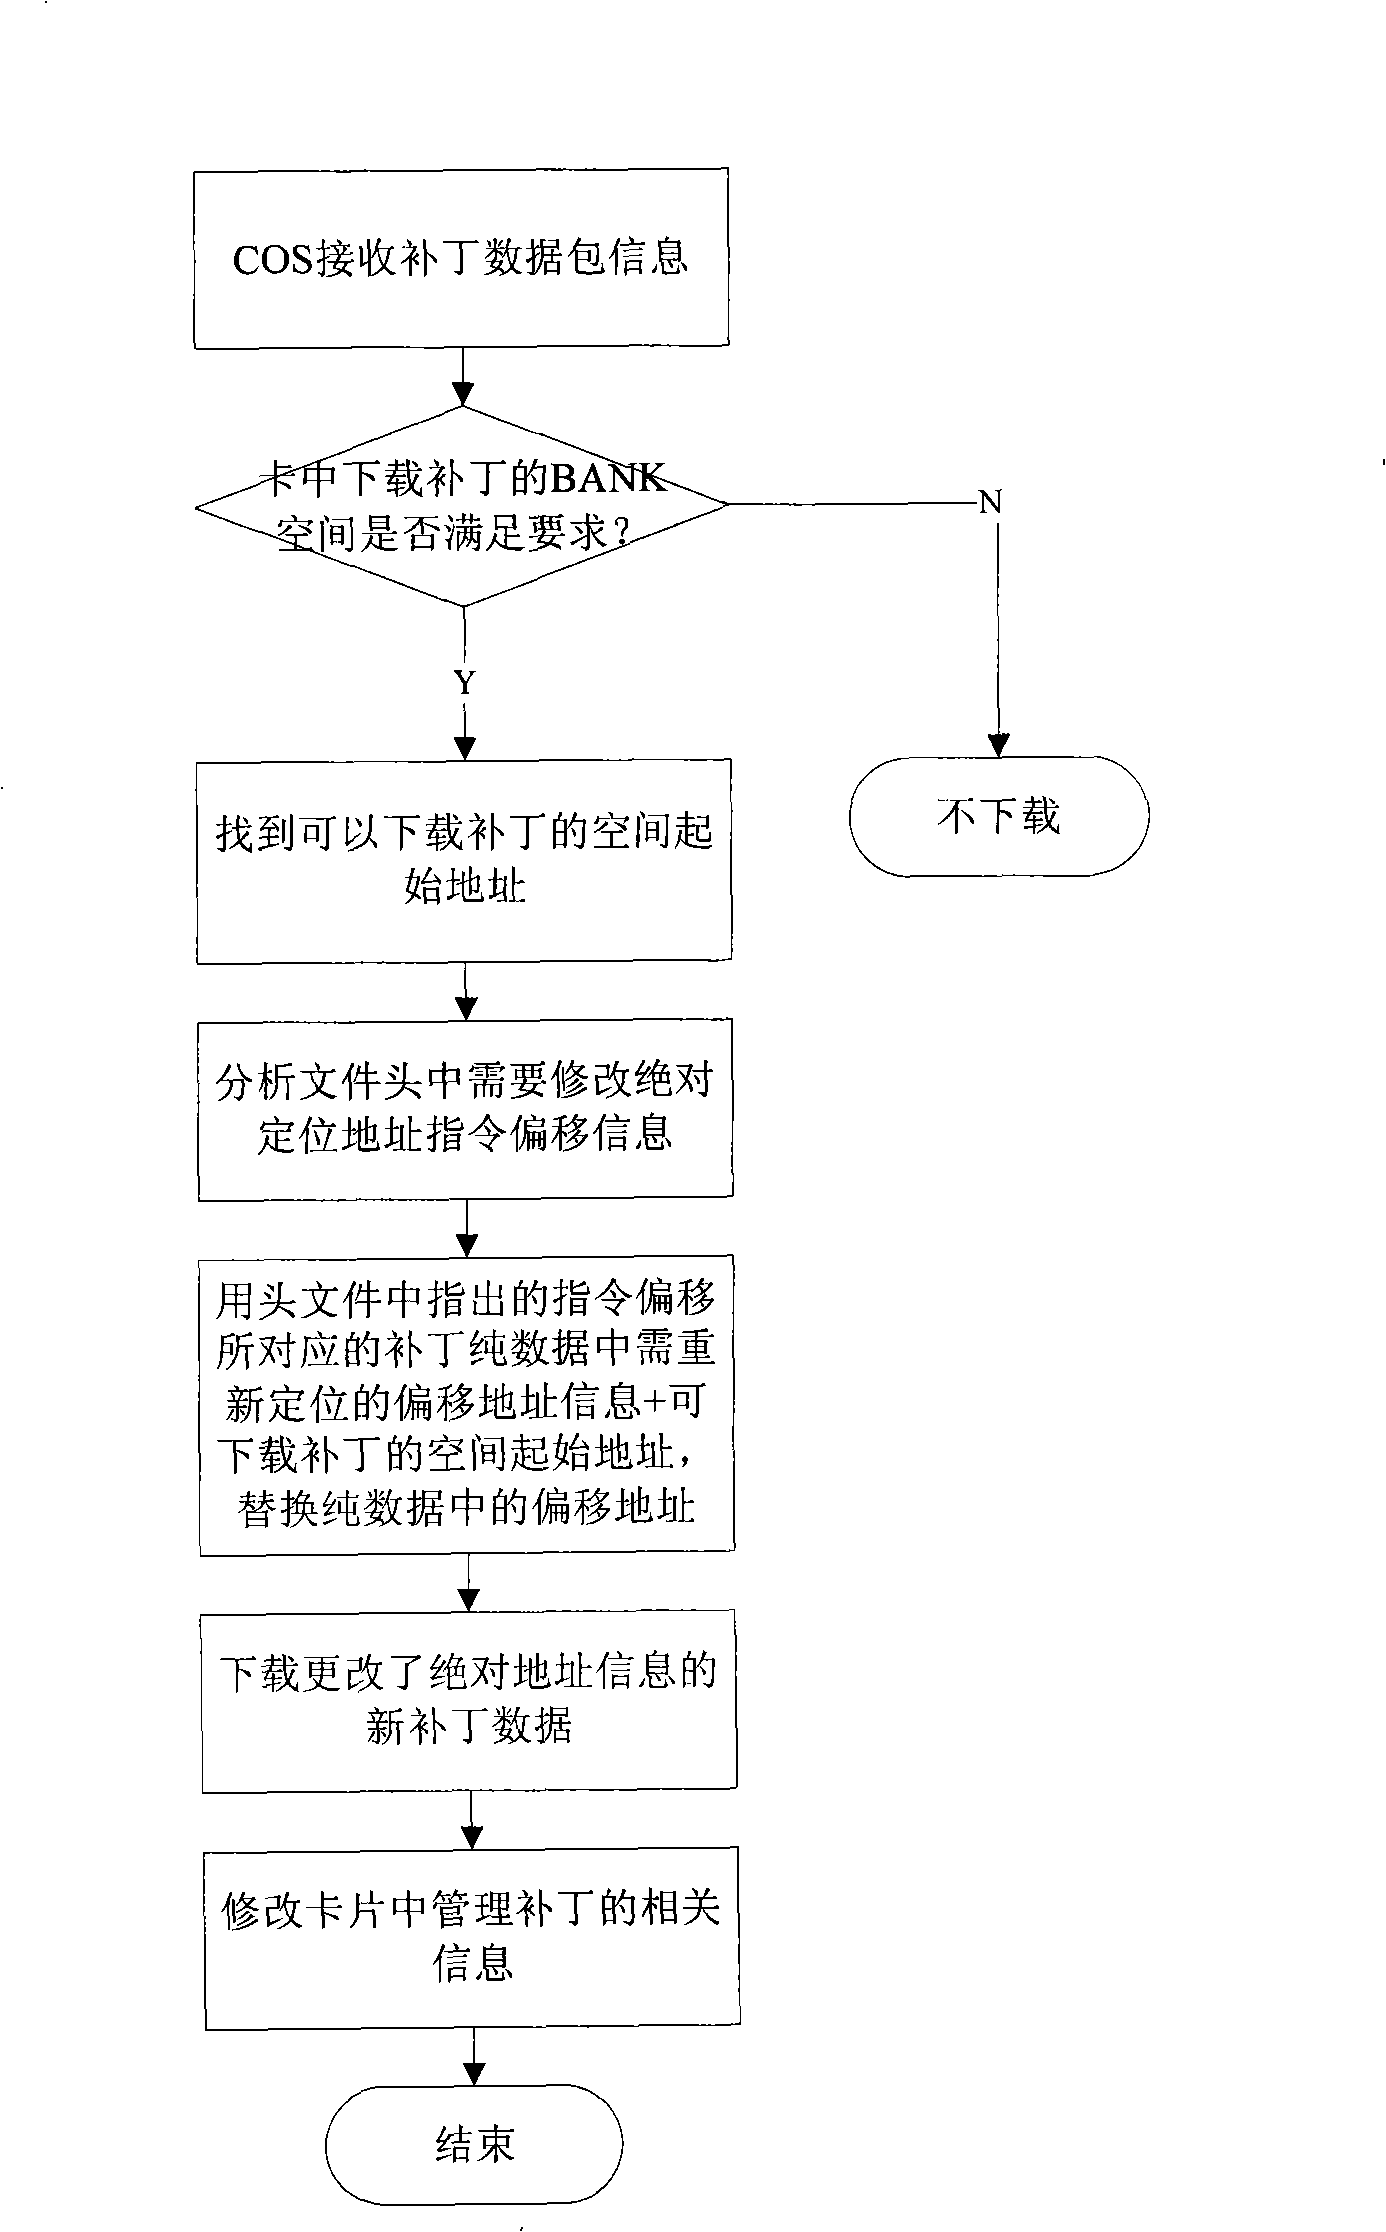 Scheme for electric communication card dynamically downloading patch program